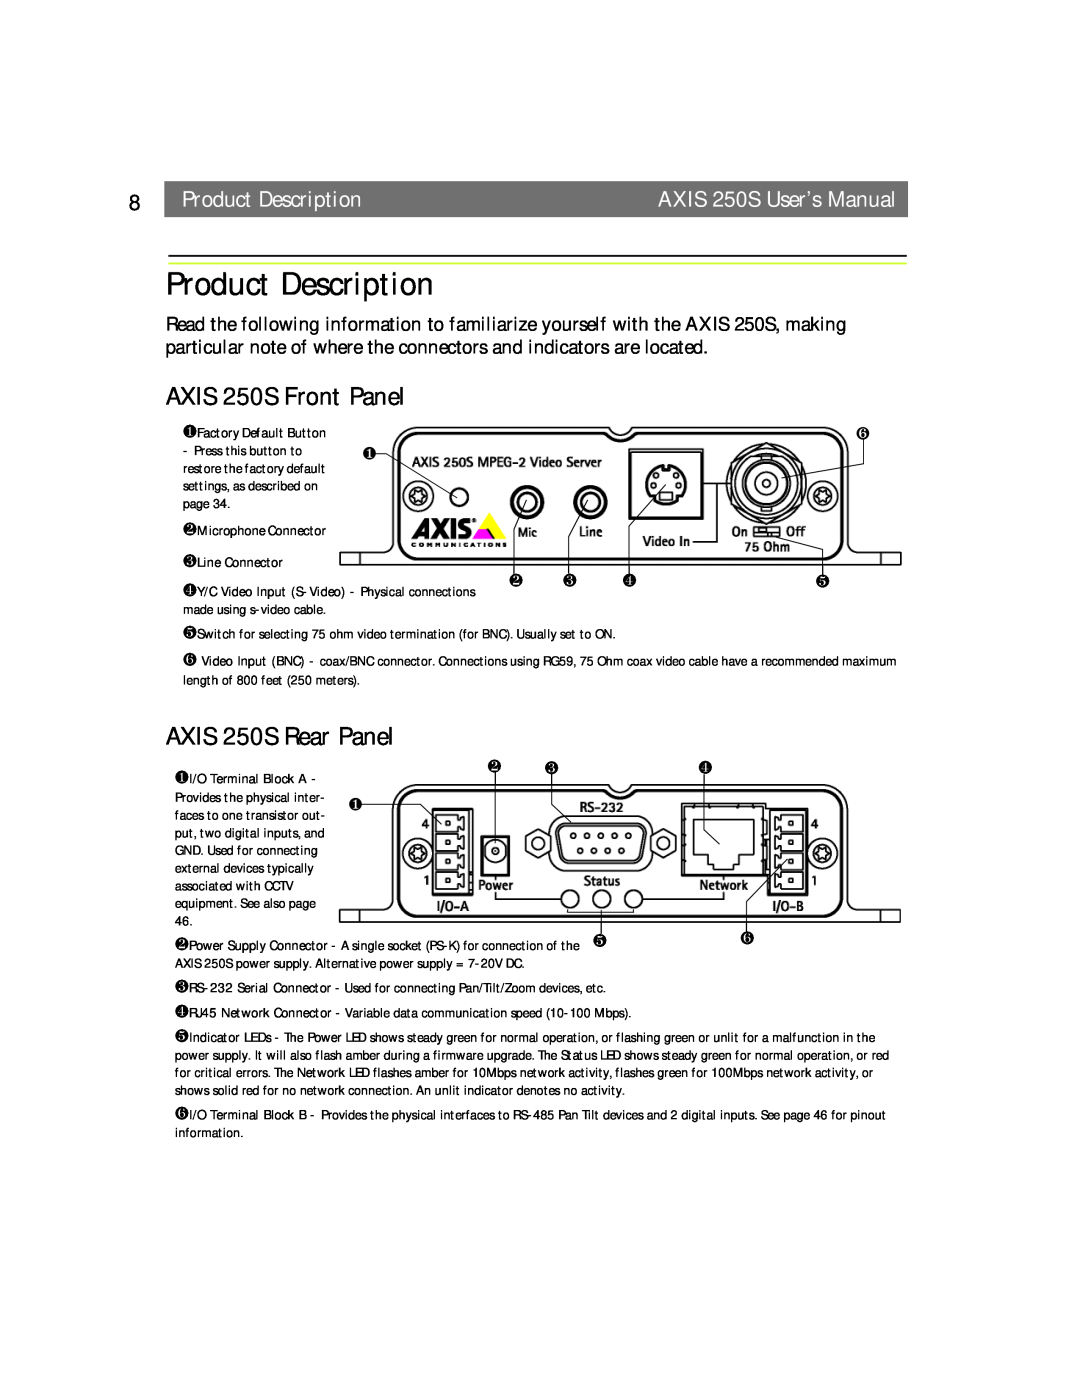 Axis Communications Product Description, AXIS 250S Front Panel, AXIS 250S Rear Panel, AXIS 250S User’s Manual 